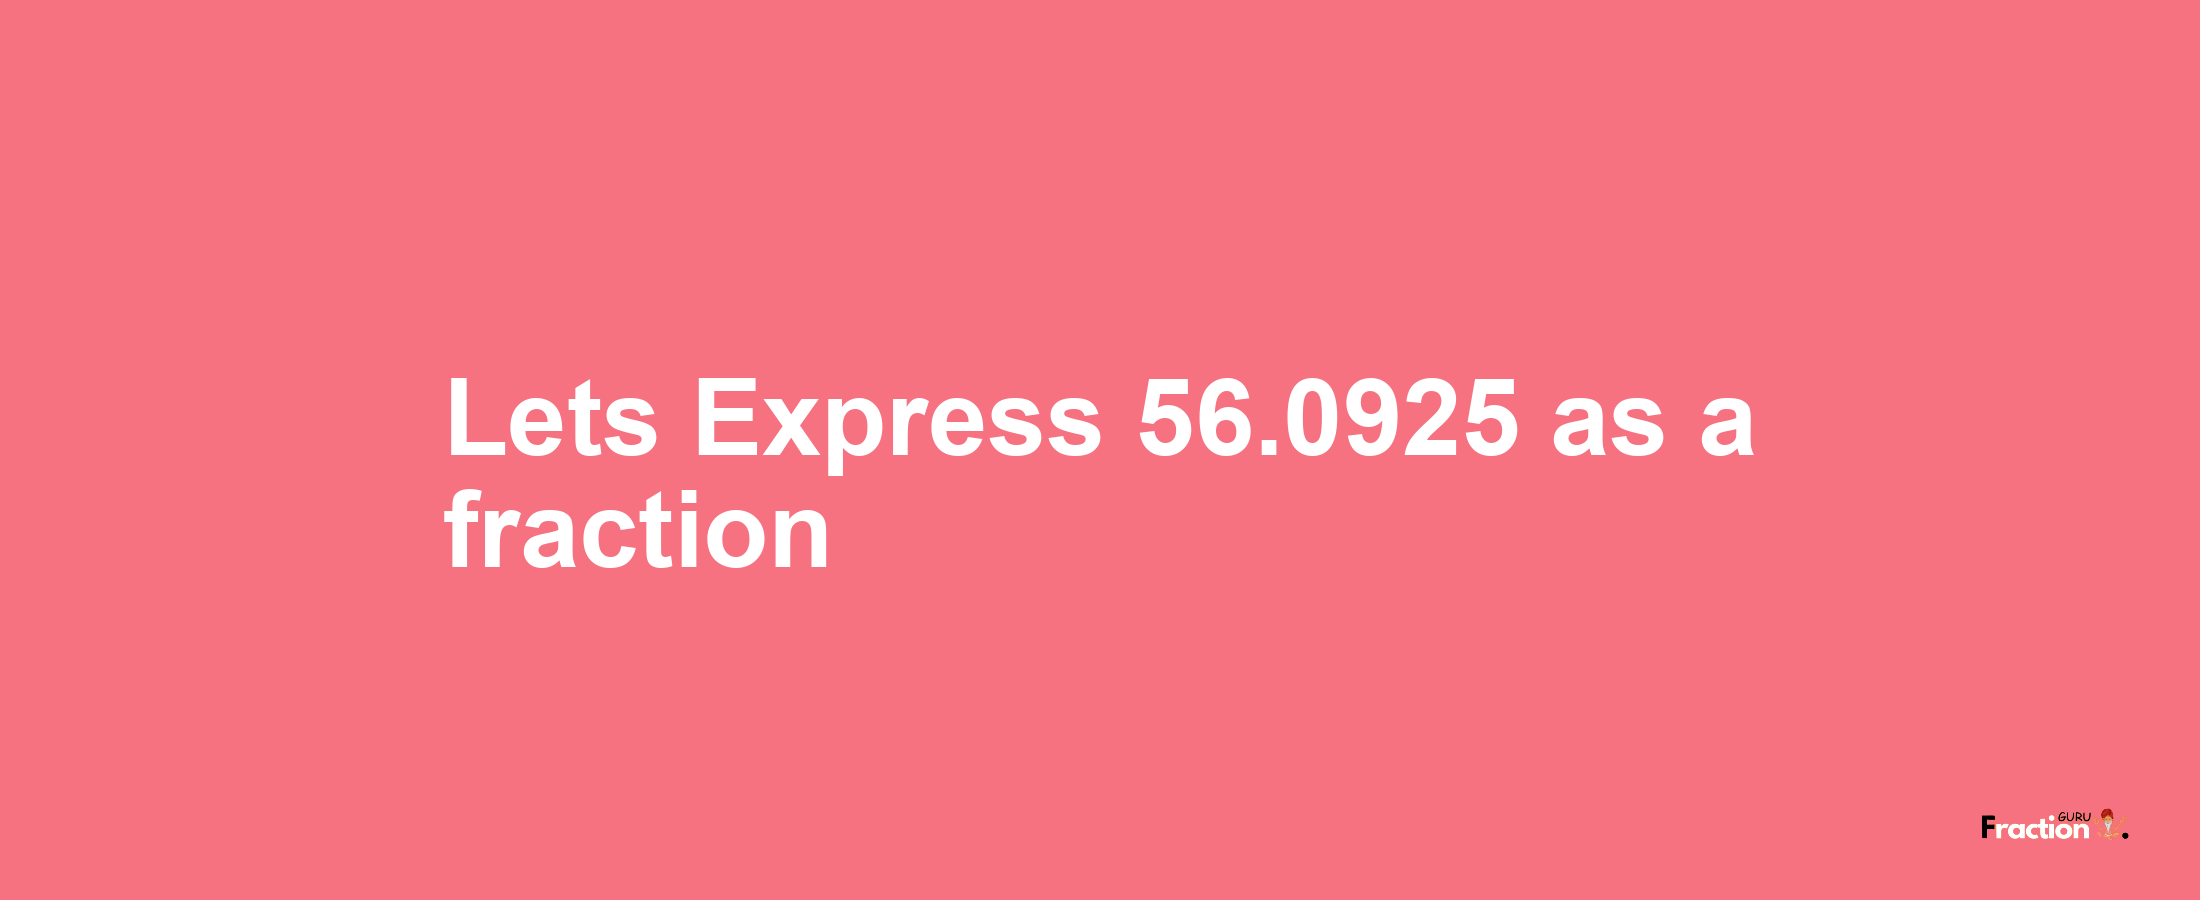 Lets Express 56.0925 as afraction